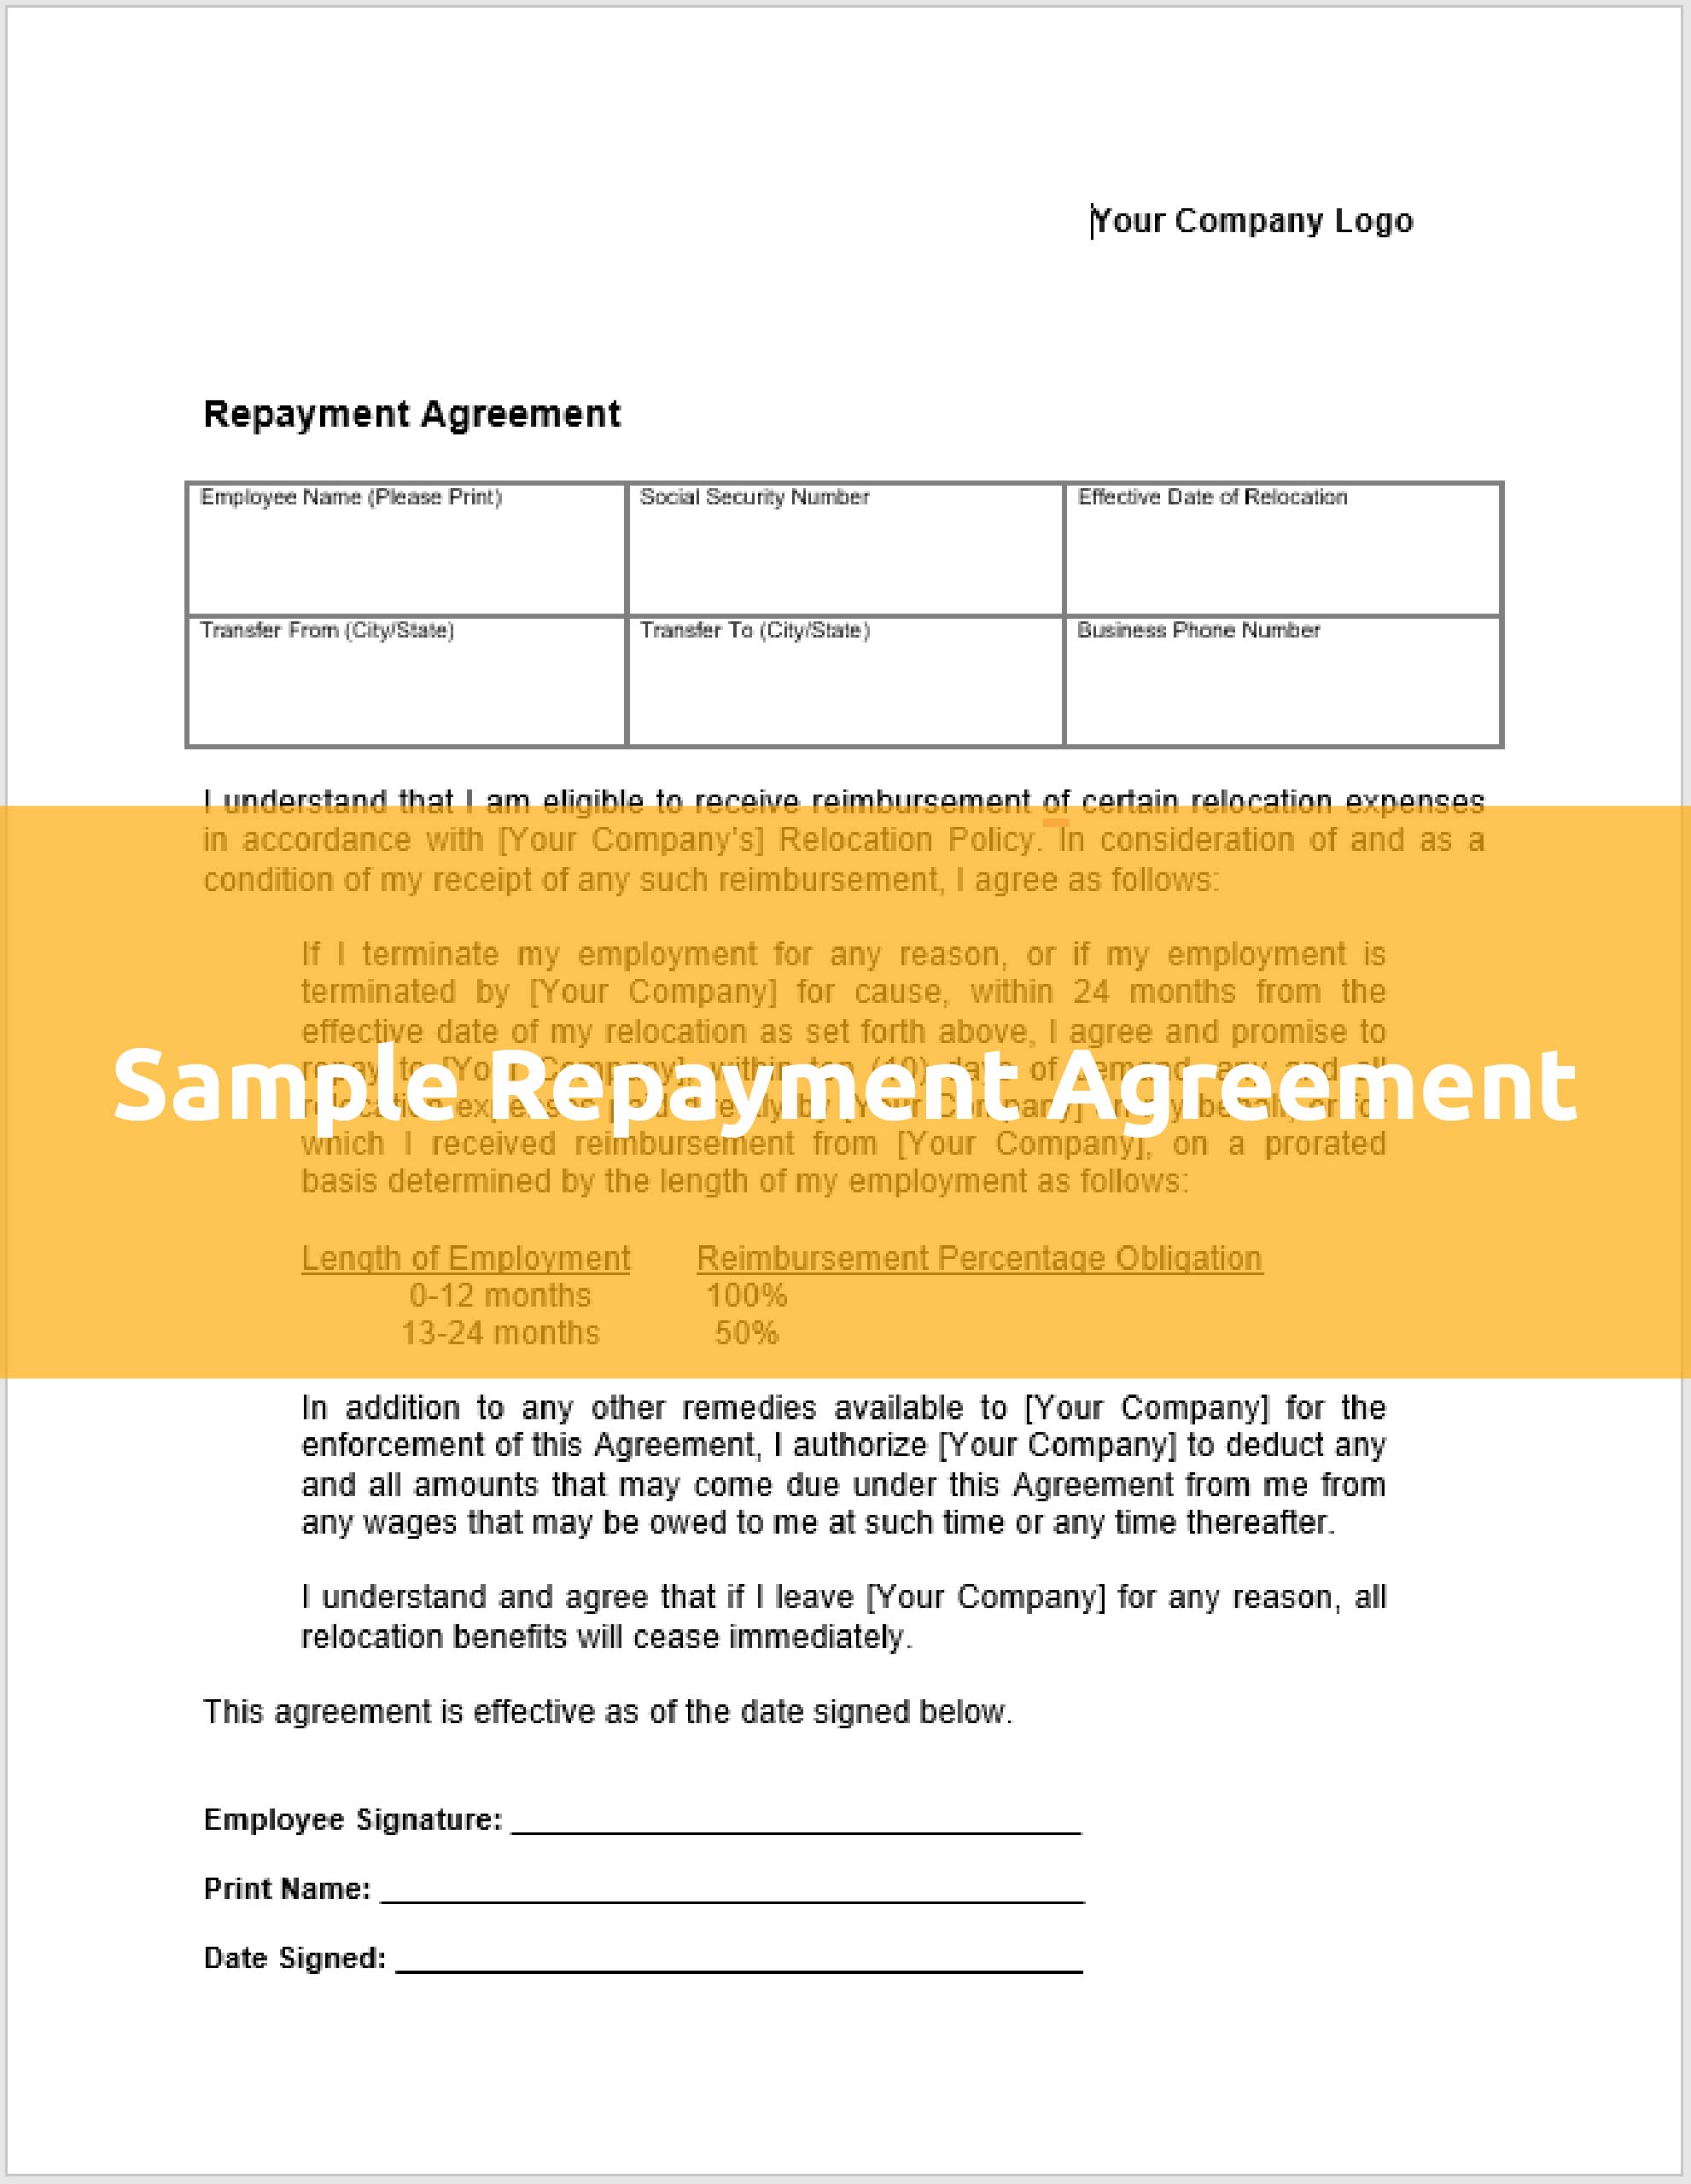 Sample Relocation Repayment Agreement